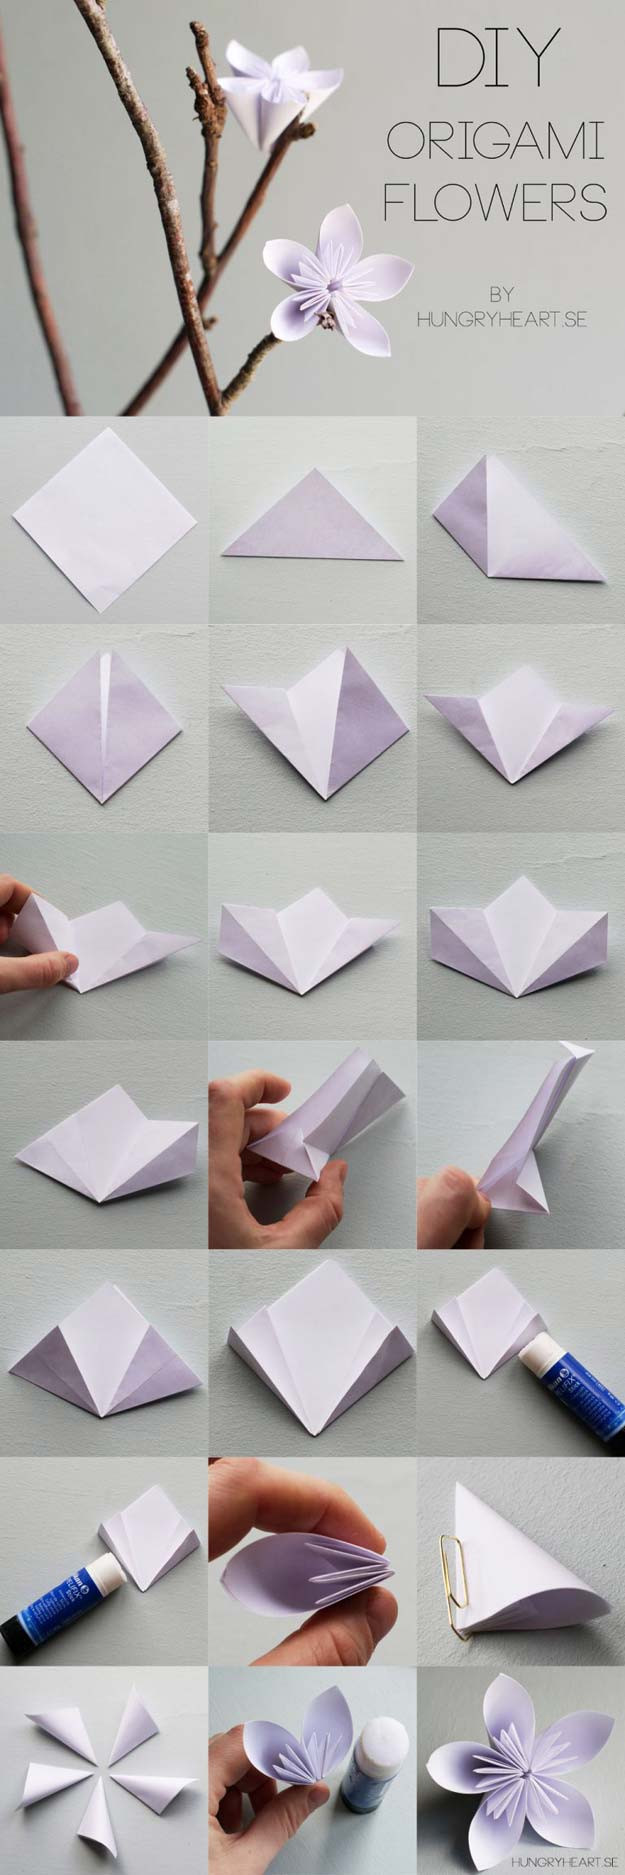 Craft Ideas For Adults Step By Step
 40 Best DIY Origami Projects To Keep Your Entertained